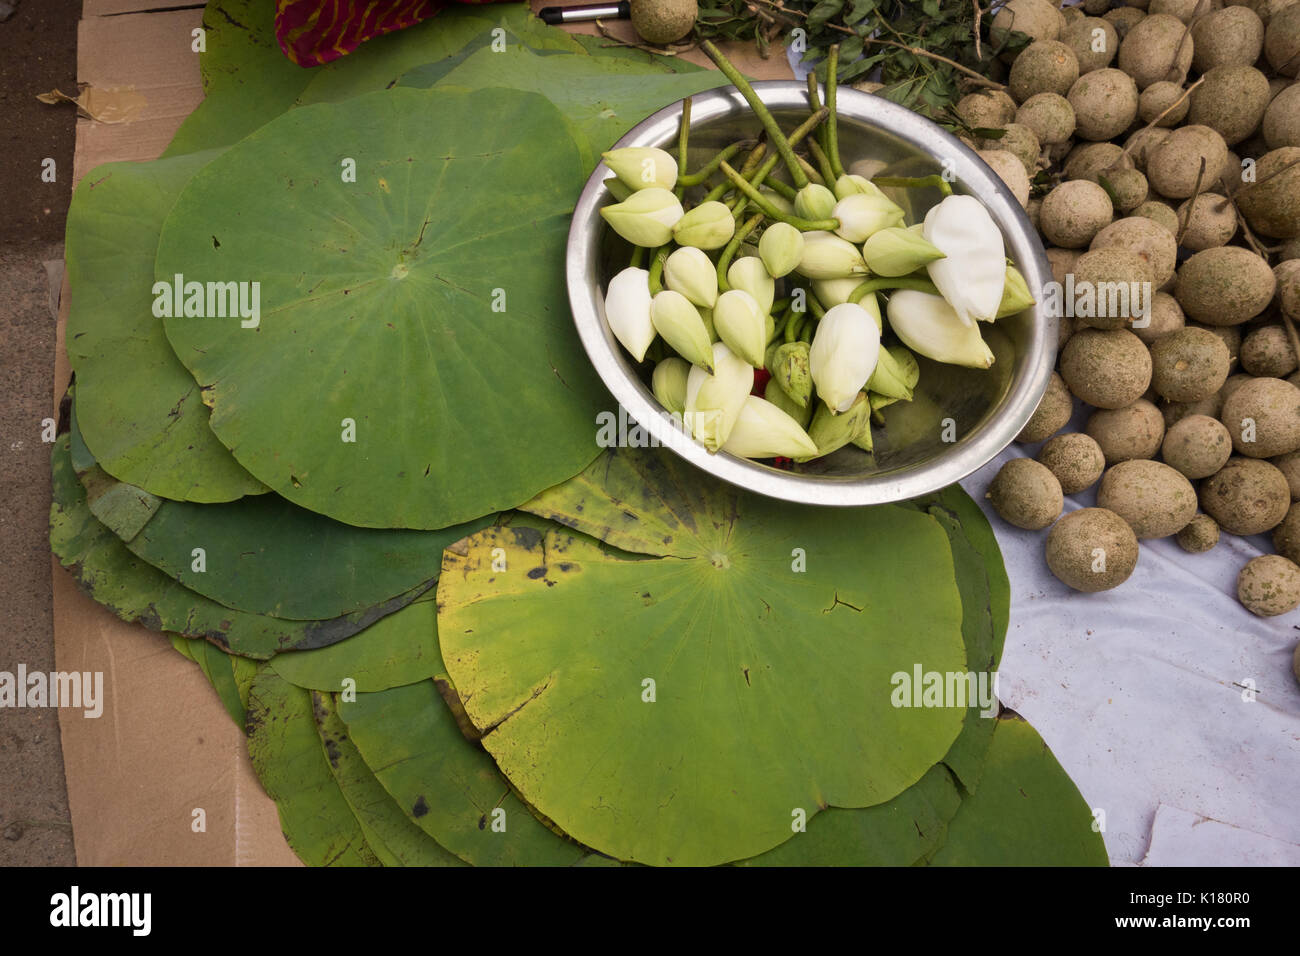 HYDERABAD, INDIA - AUGUST 25,2017 Close-up of wood apple,lotus leaf and lotus buds for sale at a marketplace on Ganesh Chaturthi festival in Hyderabad Stock Photo